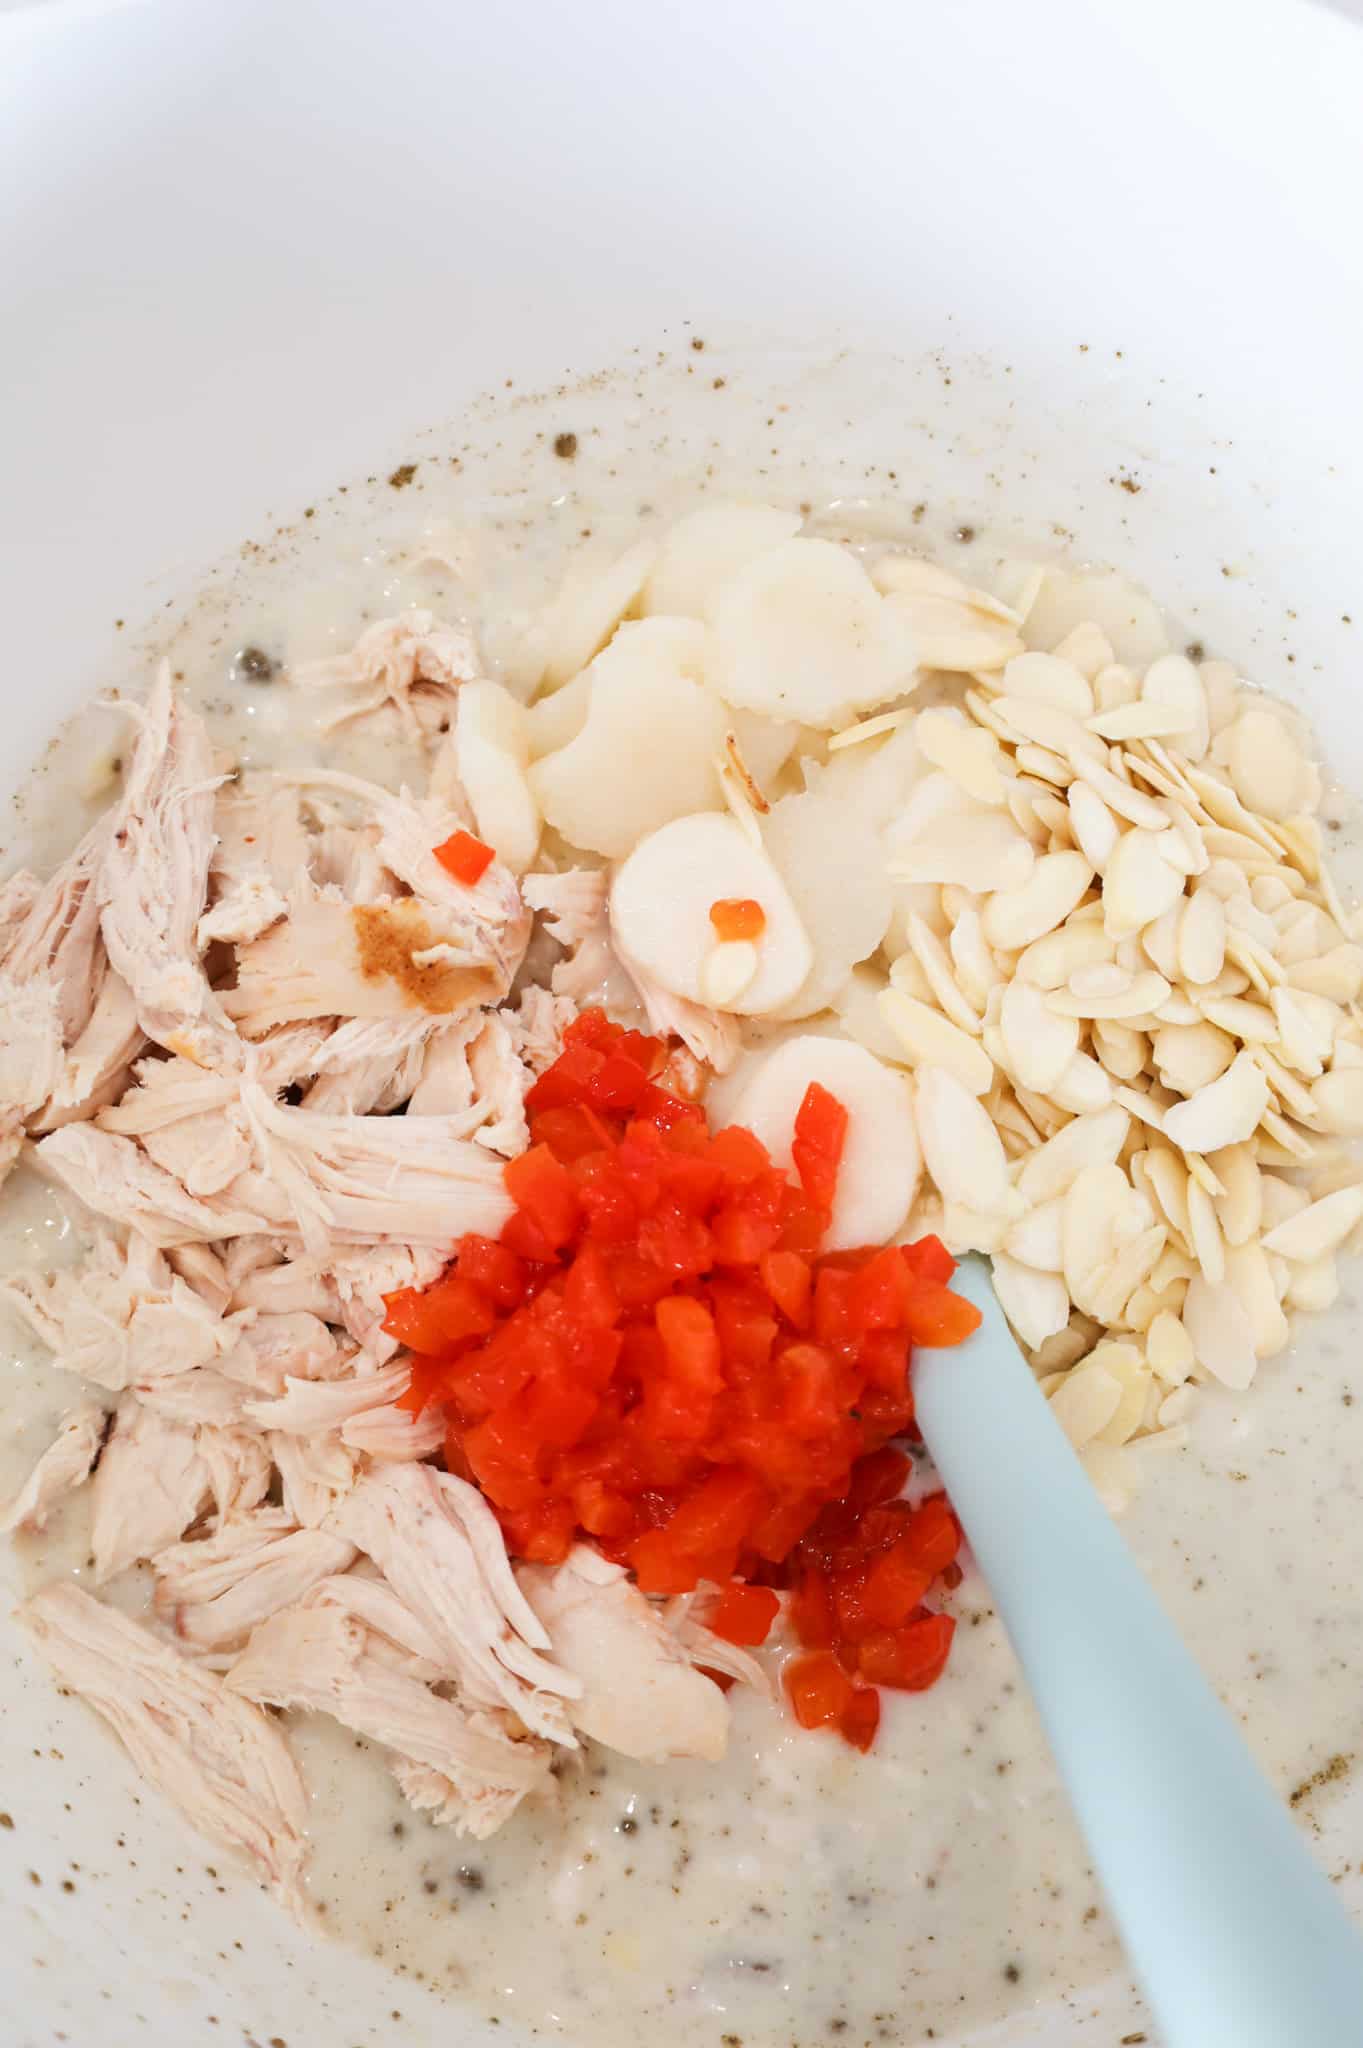 diced pimentos, shredded chicken, sliced water chestnuts and sliced almonds on top of cream soup mixture in a mixing bowl